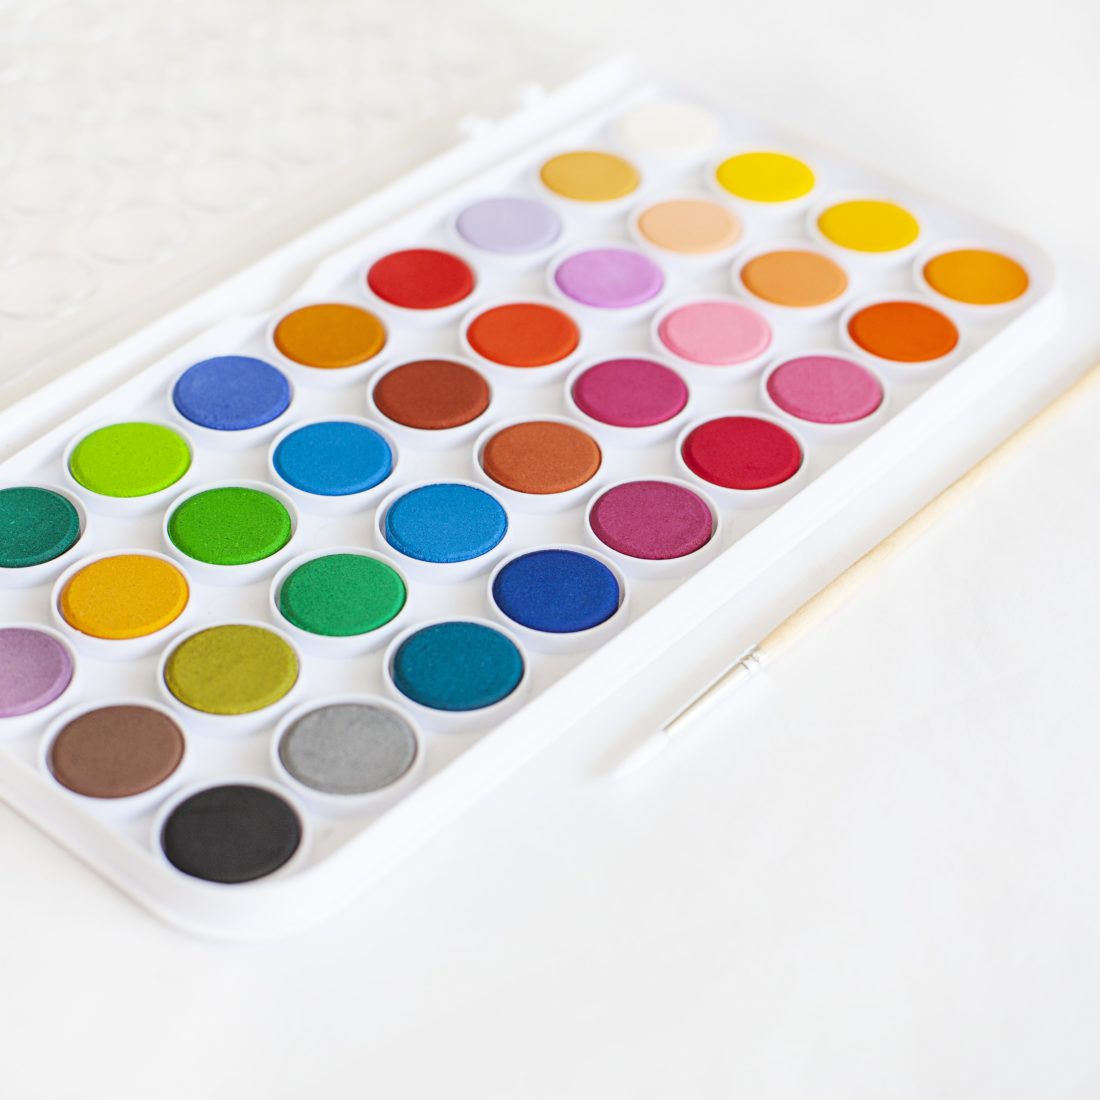 Free stock image of Watercolor Paint Palette